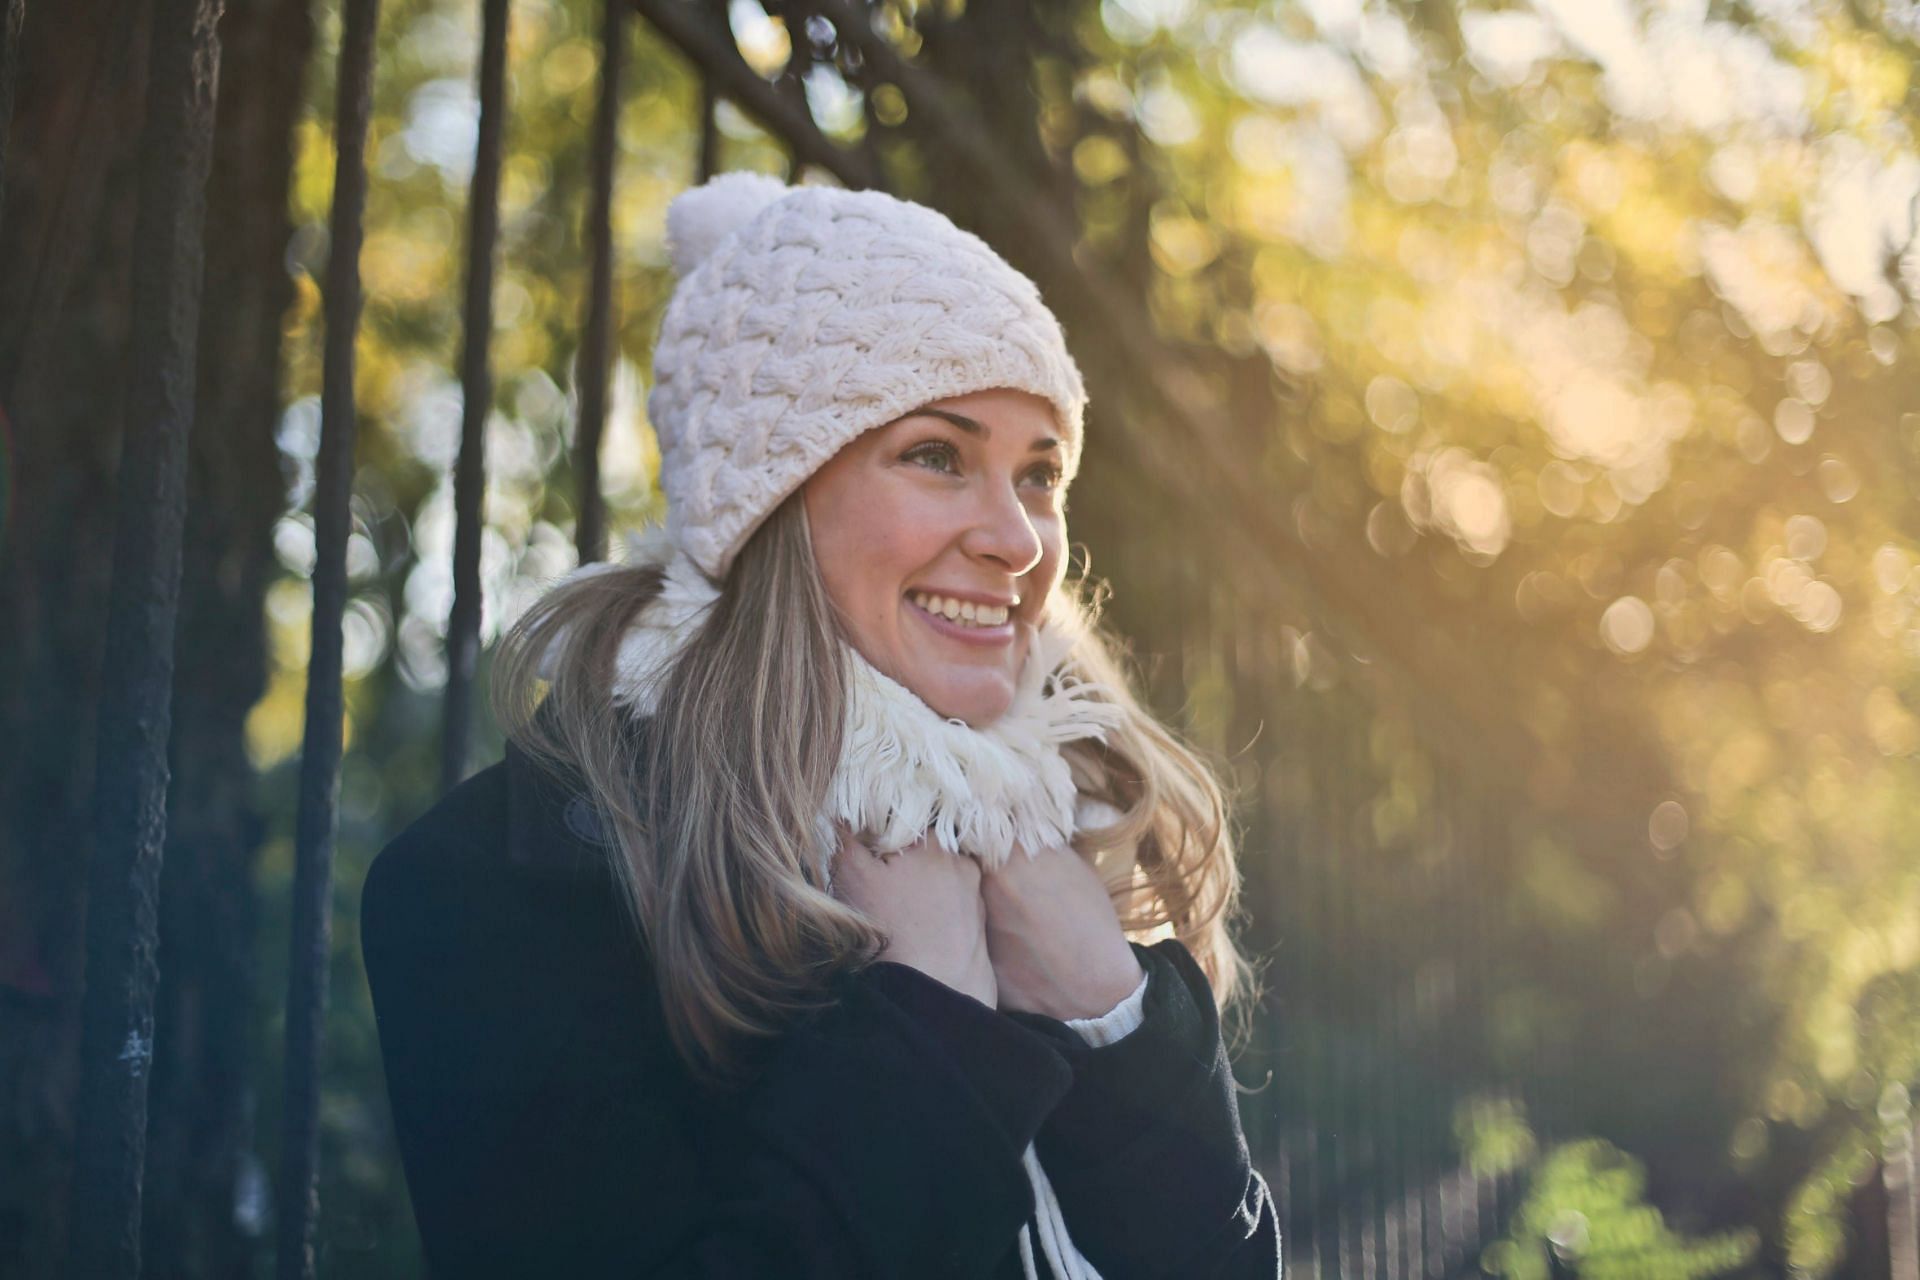  8 easy ways to get healthy skin in winters (image sourced via Pexels / Photo by Andrea)